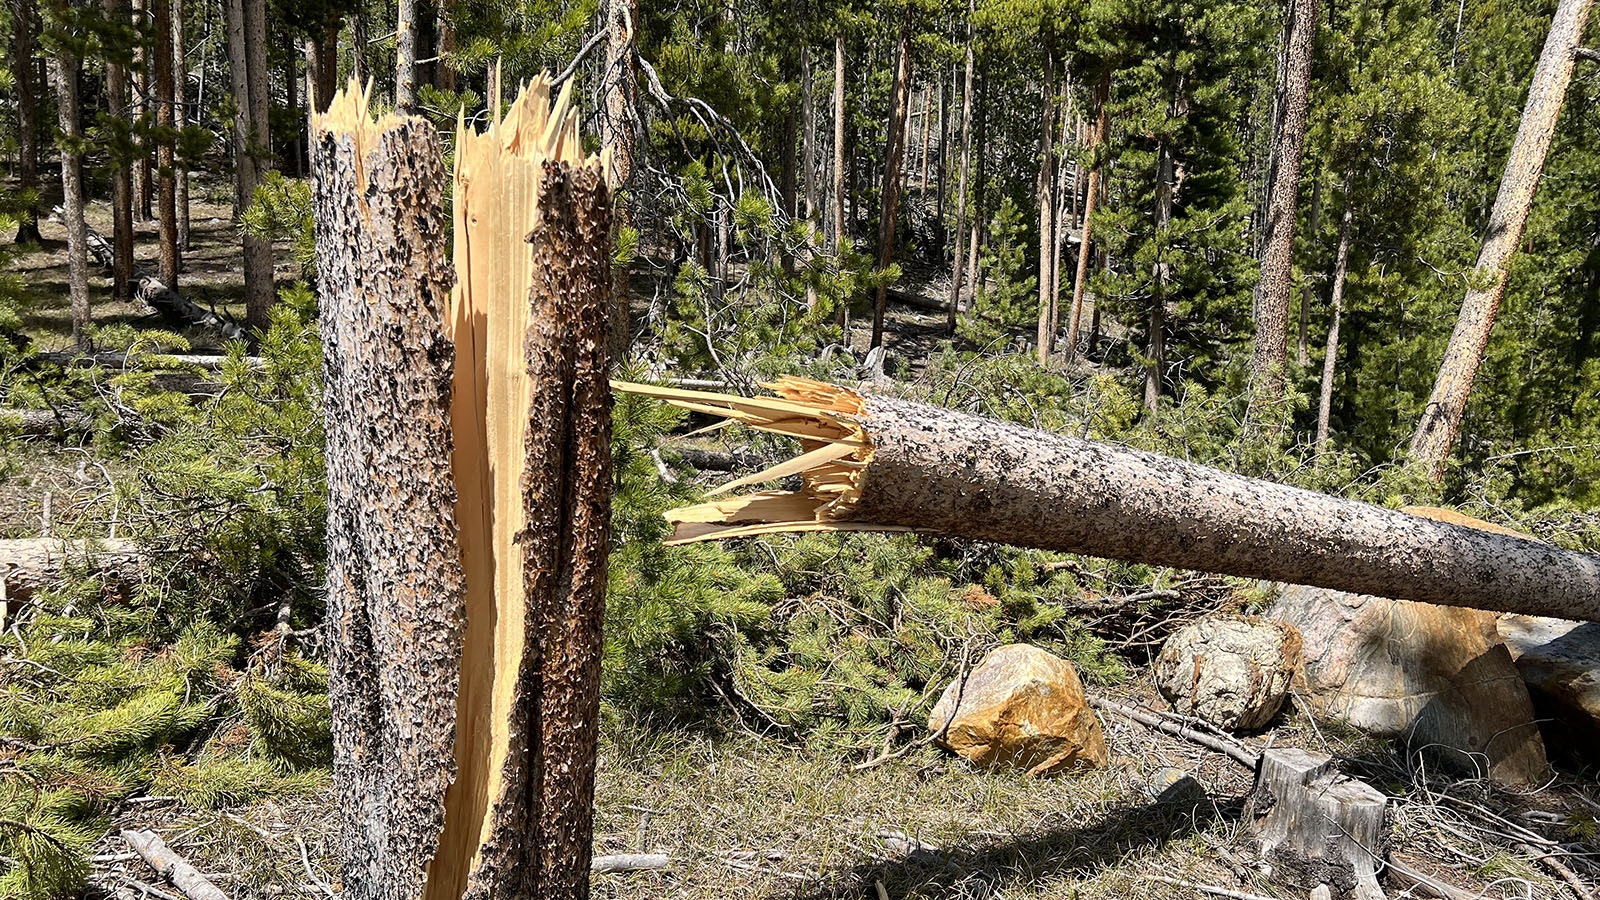 Even some live trees were snapped by recent severe winds on the Medicine Bow National Forest in the Snowy Range Mountains near Laramie.